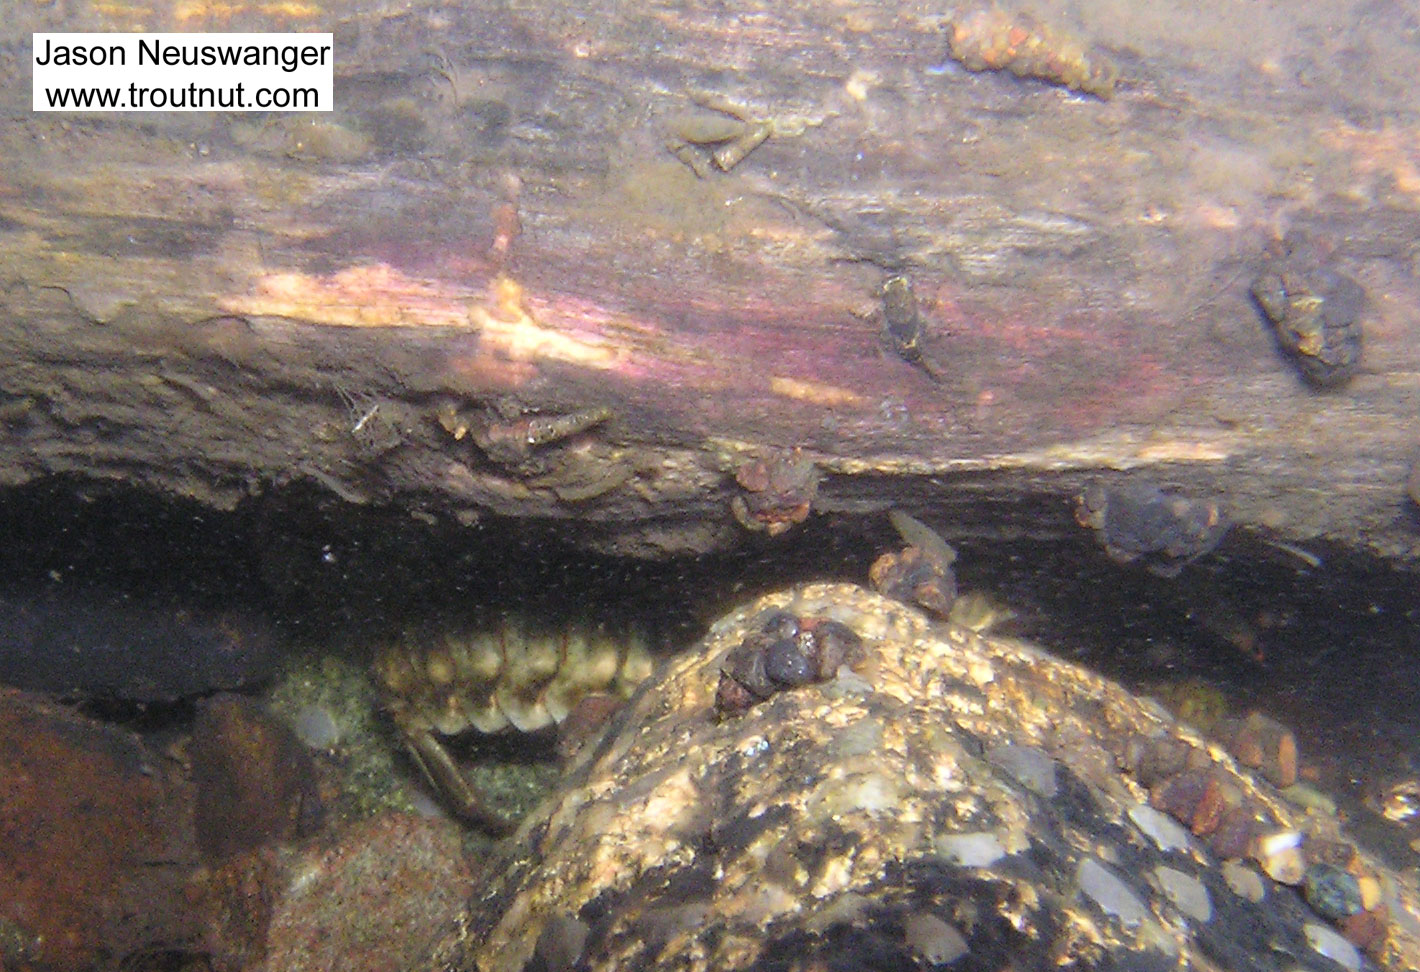 A large crayfish lurks under a log which is home to several mayfly nymphs and caddisfly larvae.  In this picture: Arthropod Order Decapoda (Crayfish), Insect Order Ephemeroptera (Mayflies), and Insect Order Trichoptera (Caddisflies). From the Namekagon River in Wisconsin.